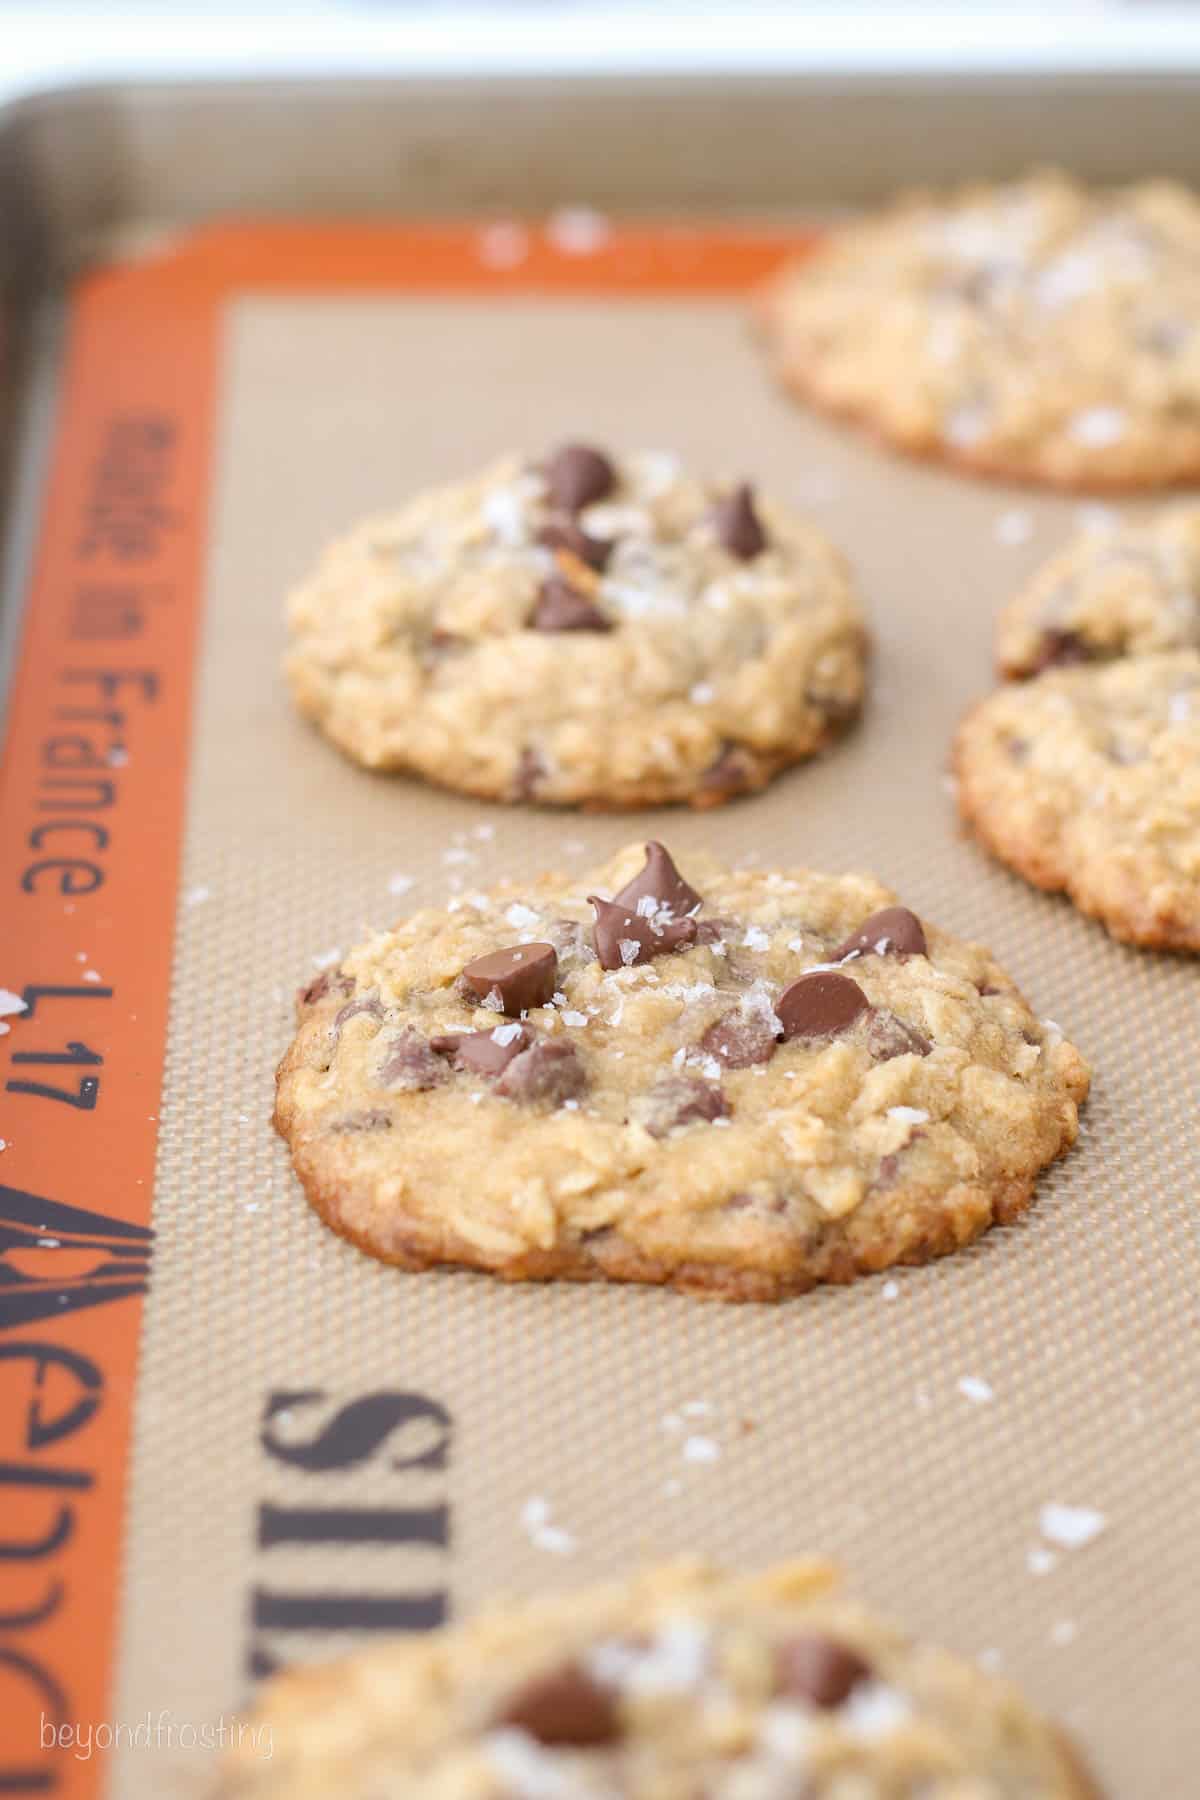 An example of slightly flattened chocolate chip oatmeal cookies baked with room-temperature butter on a silicone lined baking sheet.